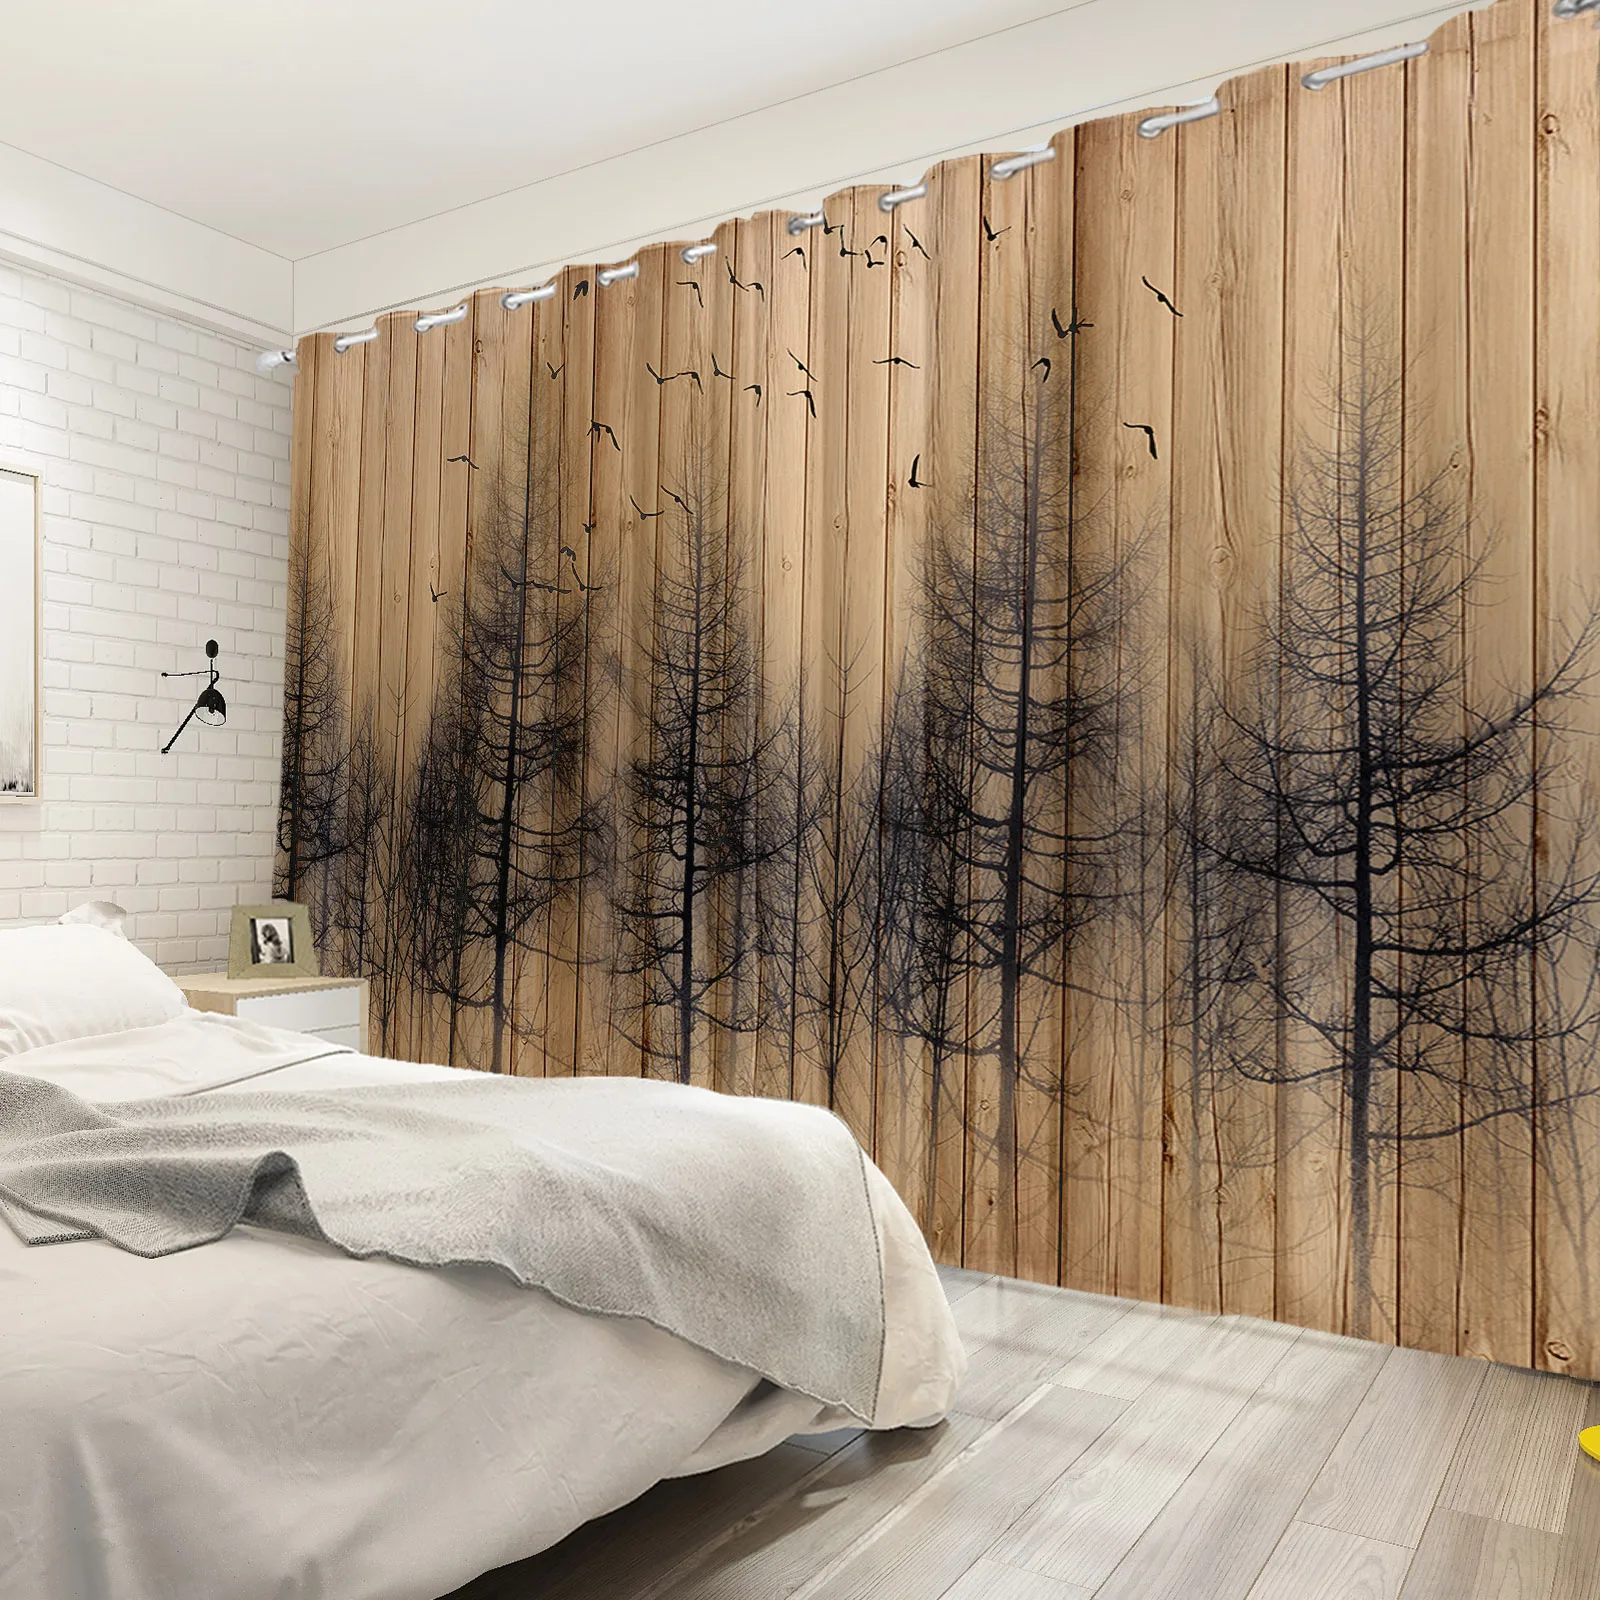 

Dead Trees Birds Painting 3D Blackout Curtain Bedroom Blinds for Windows Living Room Bedroom Treatment Cortinas Sunshade Drapes